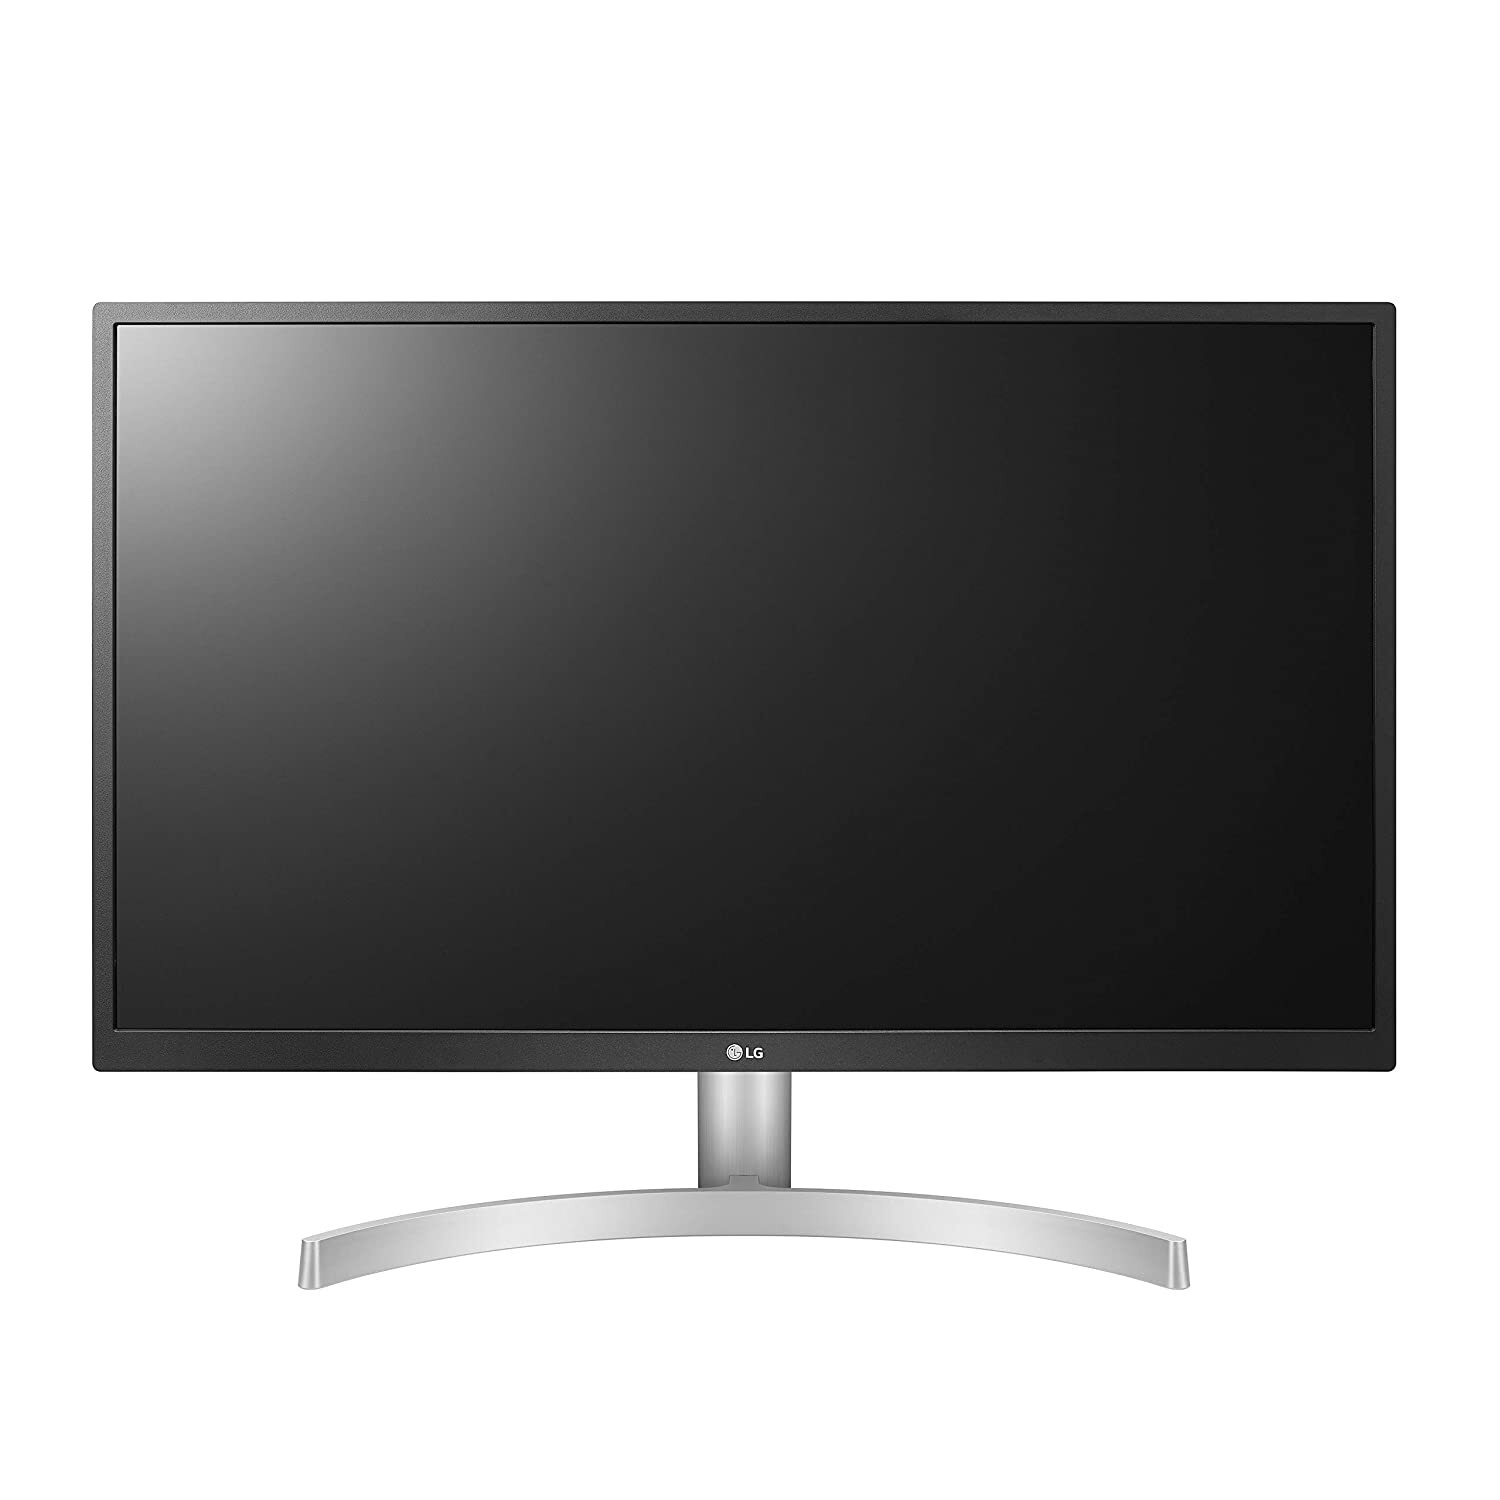 LG 27 inch 4K-UHD (3840 x 2160) HDR 10 Monitor (Gaming & Design) with IPS Panel, HDMI x 2, Display Port, AMD Freesync  - 27UL500 (Silver Stand with White Body)